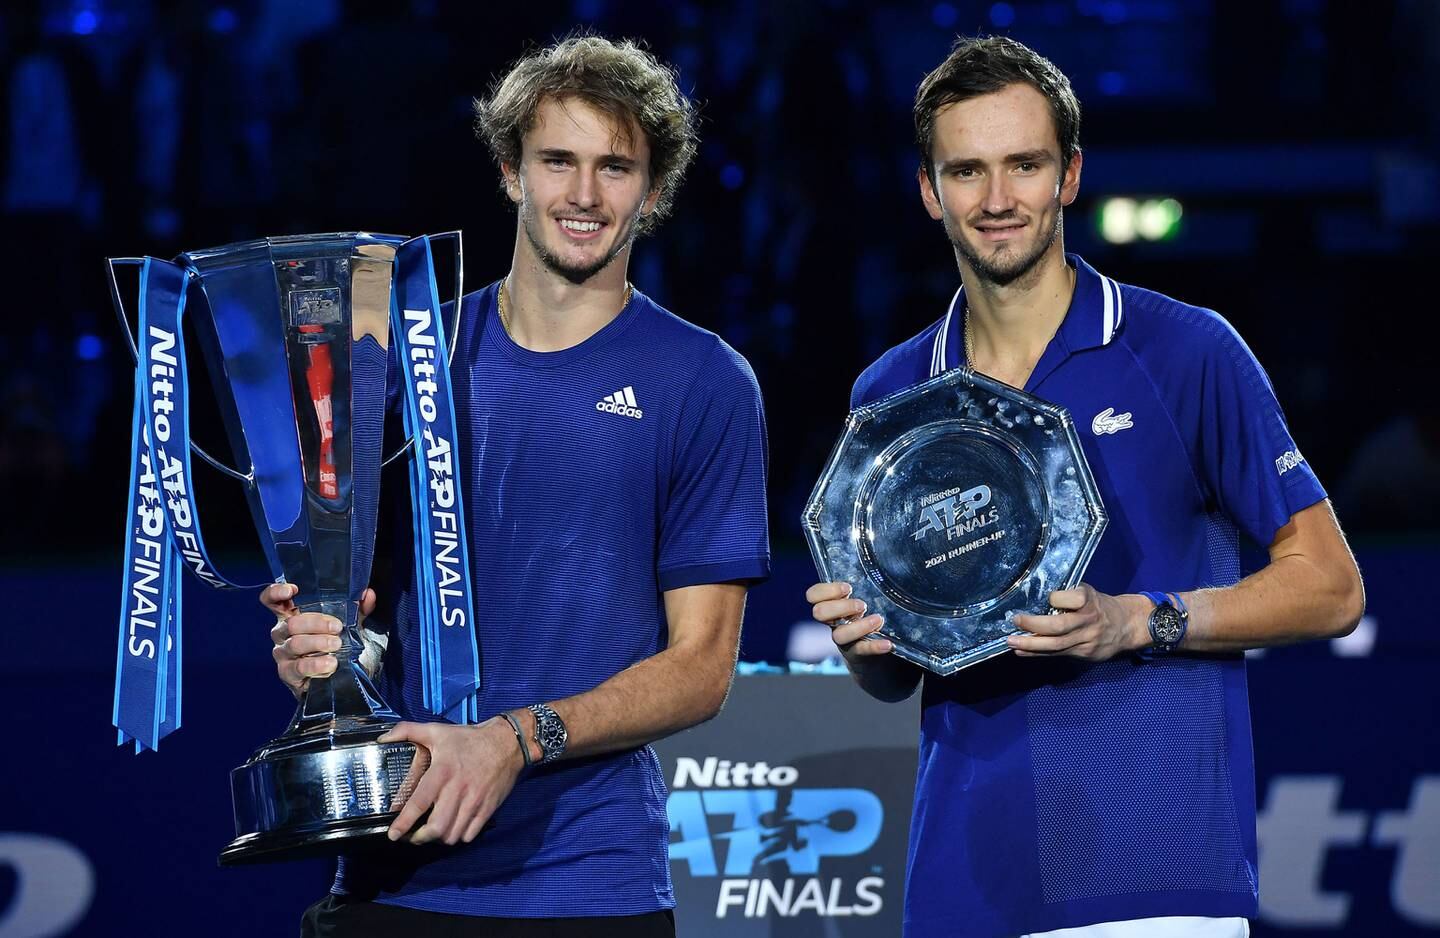 Alexander Zverev (L) of Germany poses with the trophy after winning the final match against Daniil Medvedev of Russia at the Nitto ATP Finals tennis tournament in Turin, Italy. EPA.